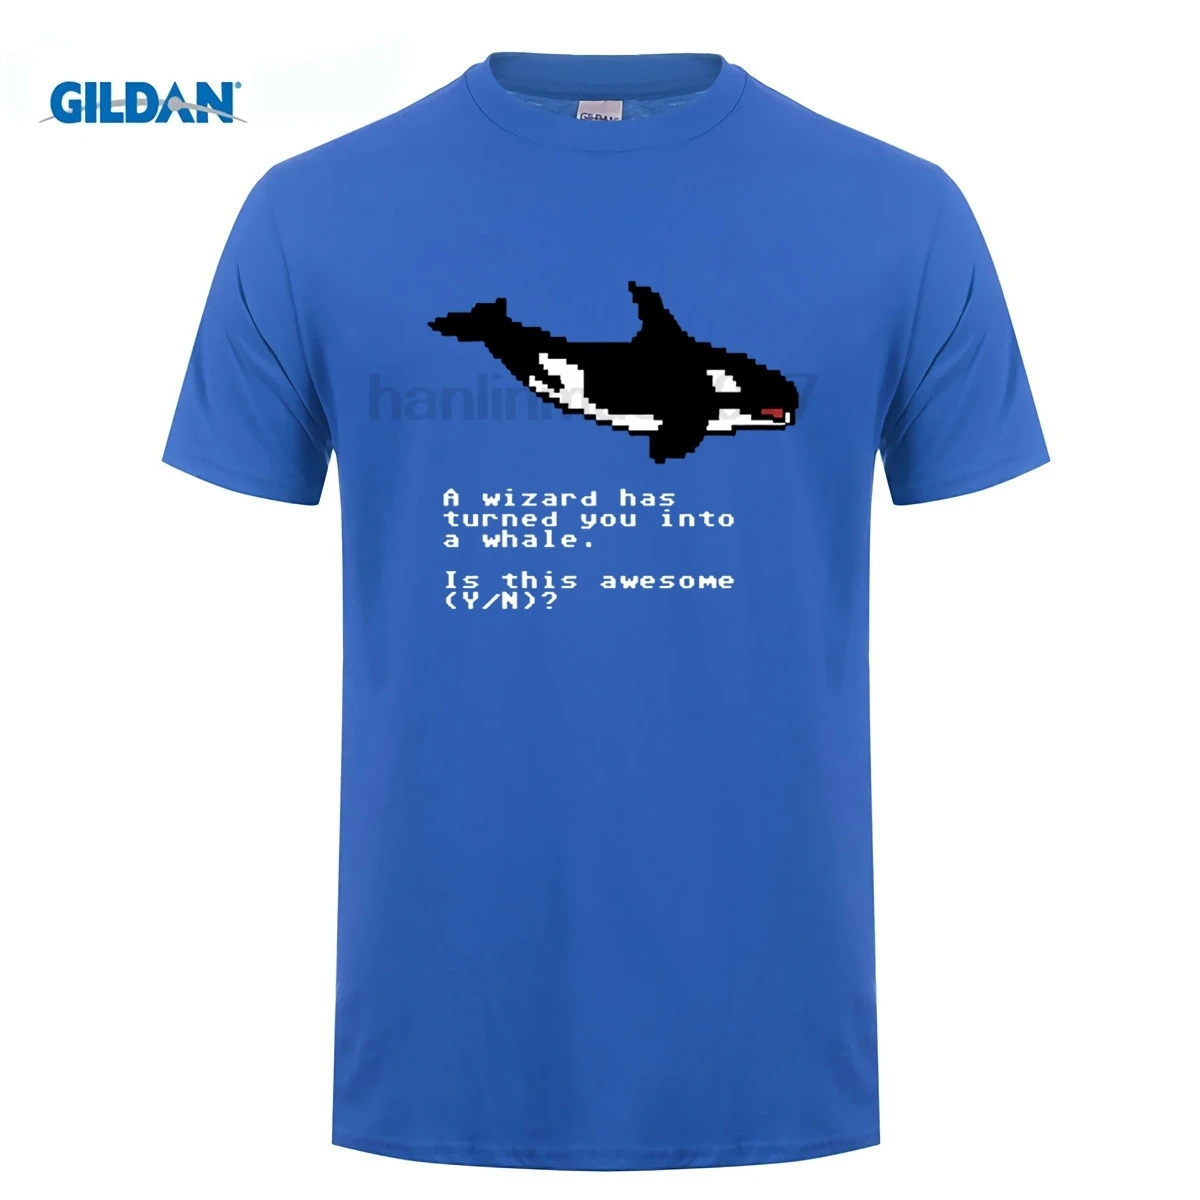 GILDAN Wizard Turned Into A Whale IT Crowd Inspired Funny Nerd Geek New ...